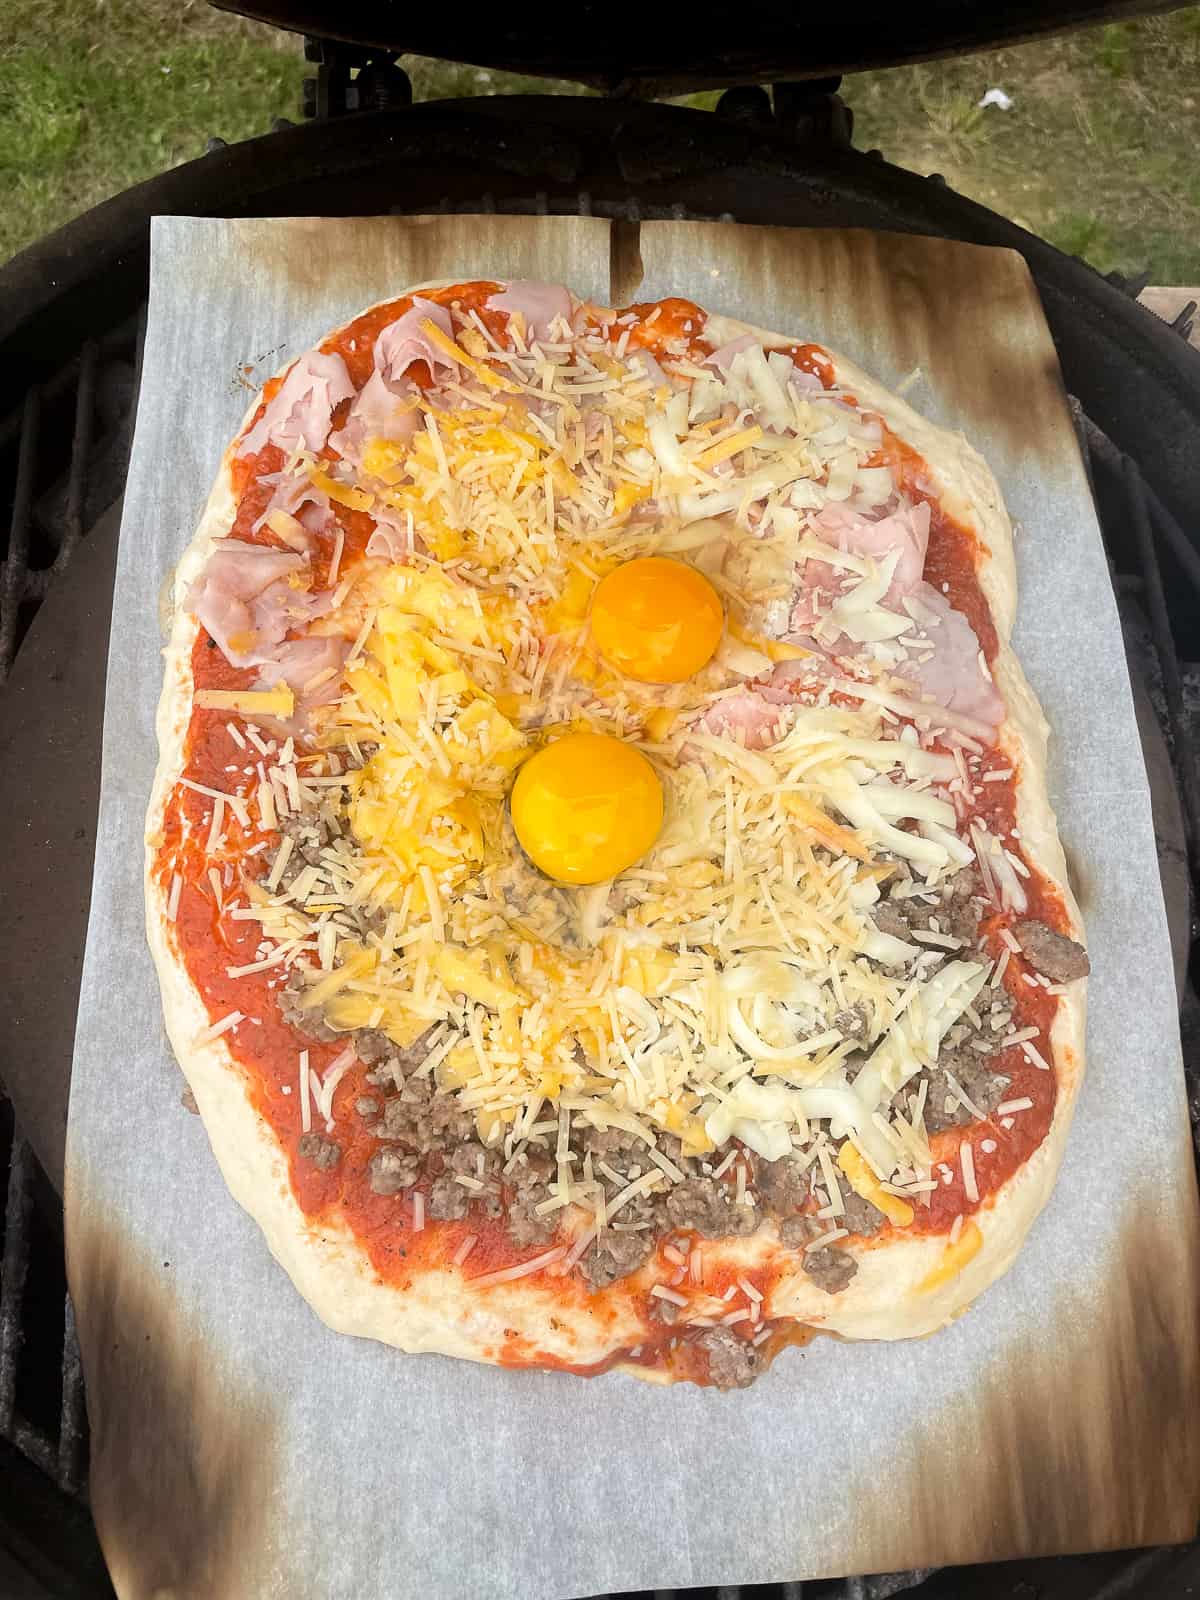 One. of the pizzas on the grill with eggs on top.